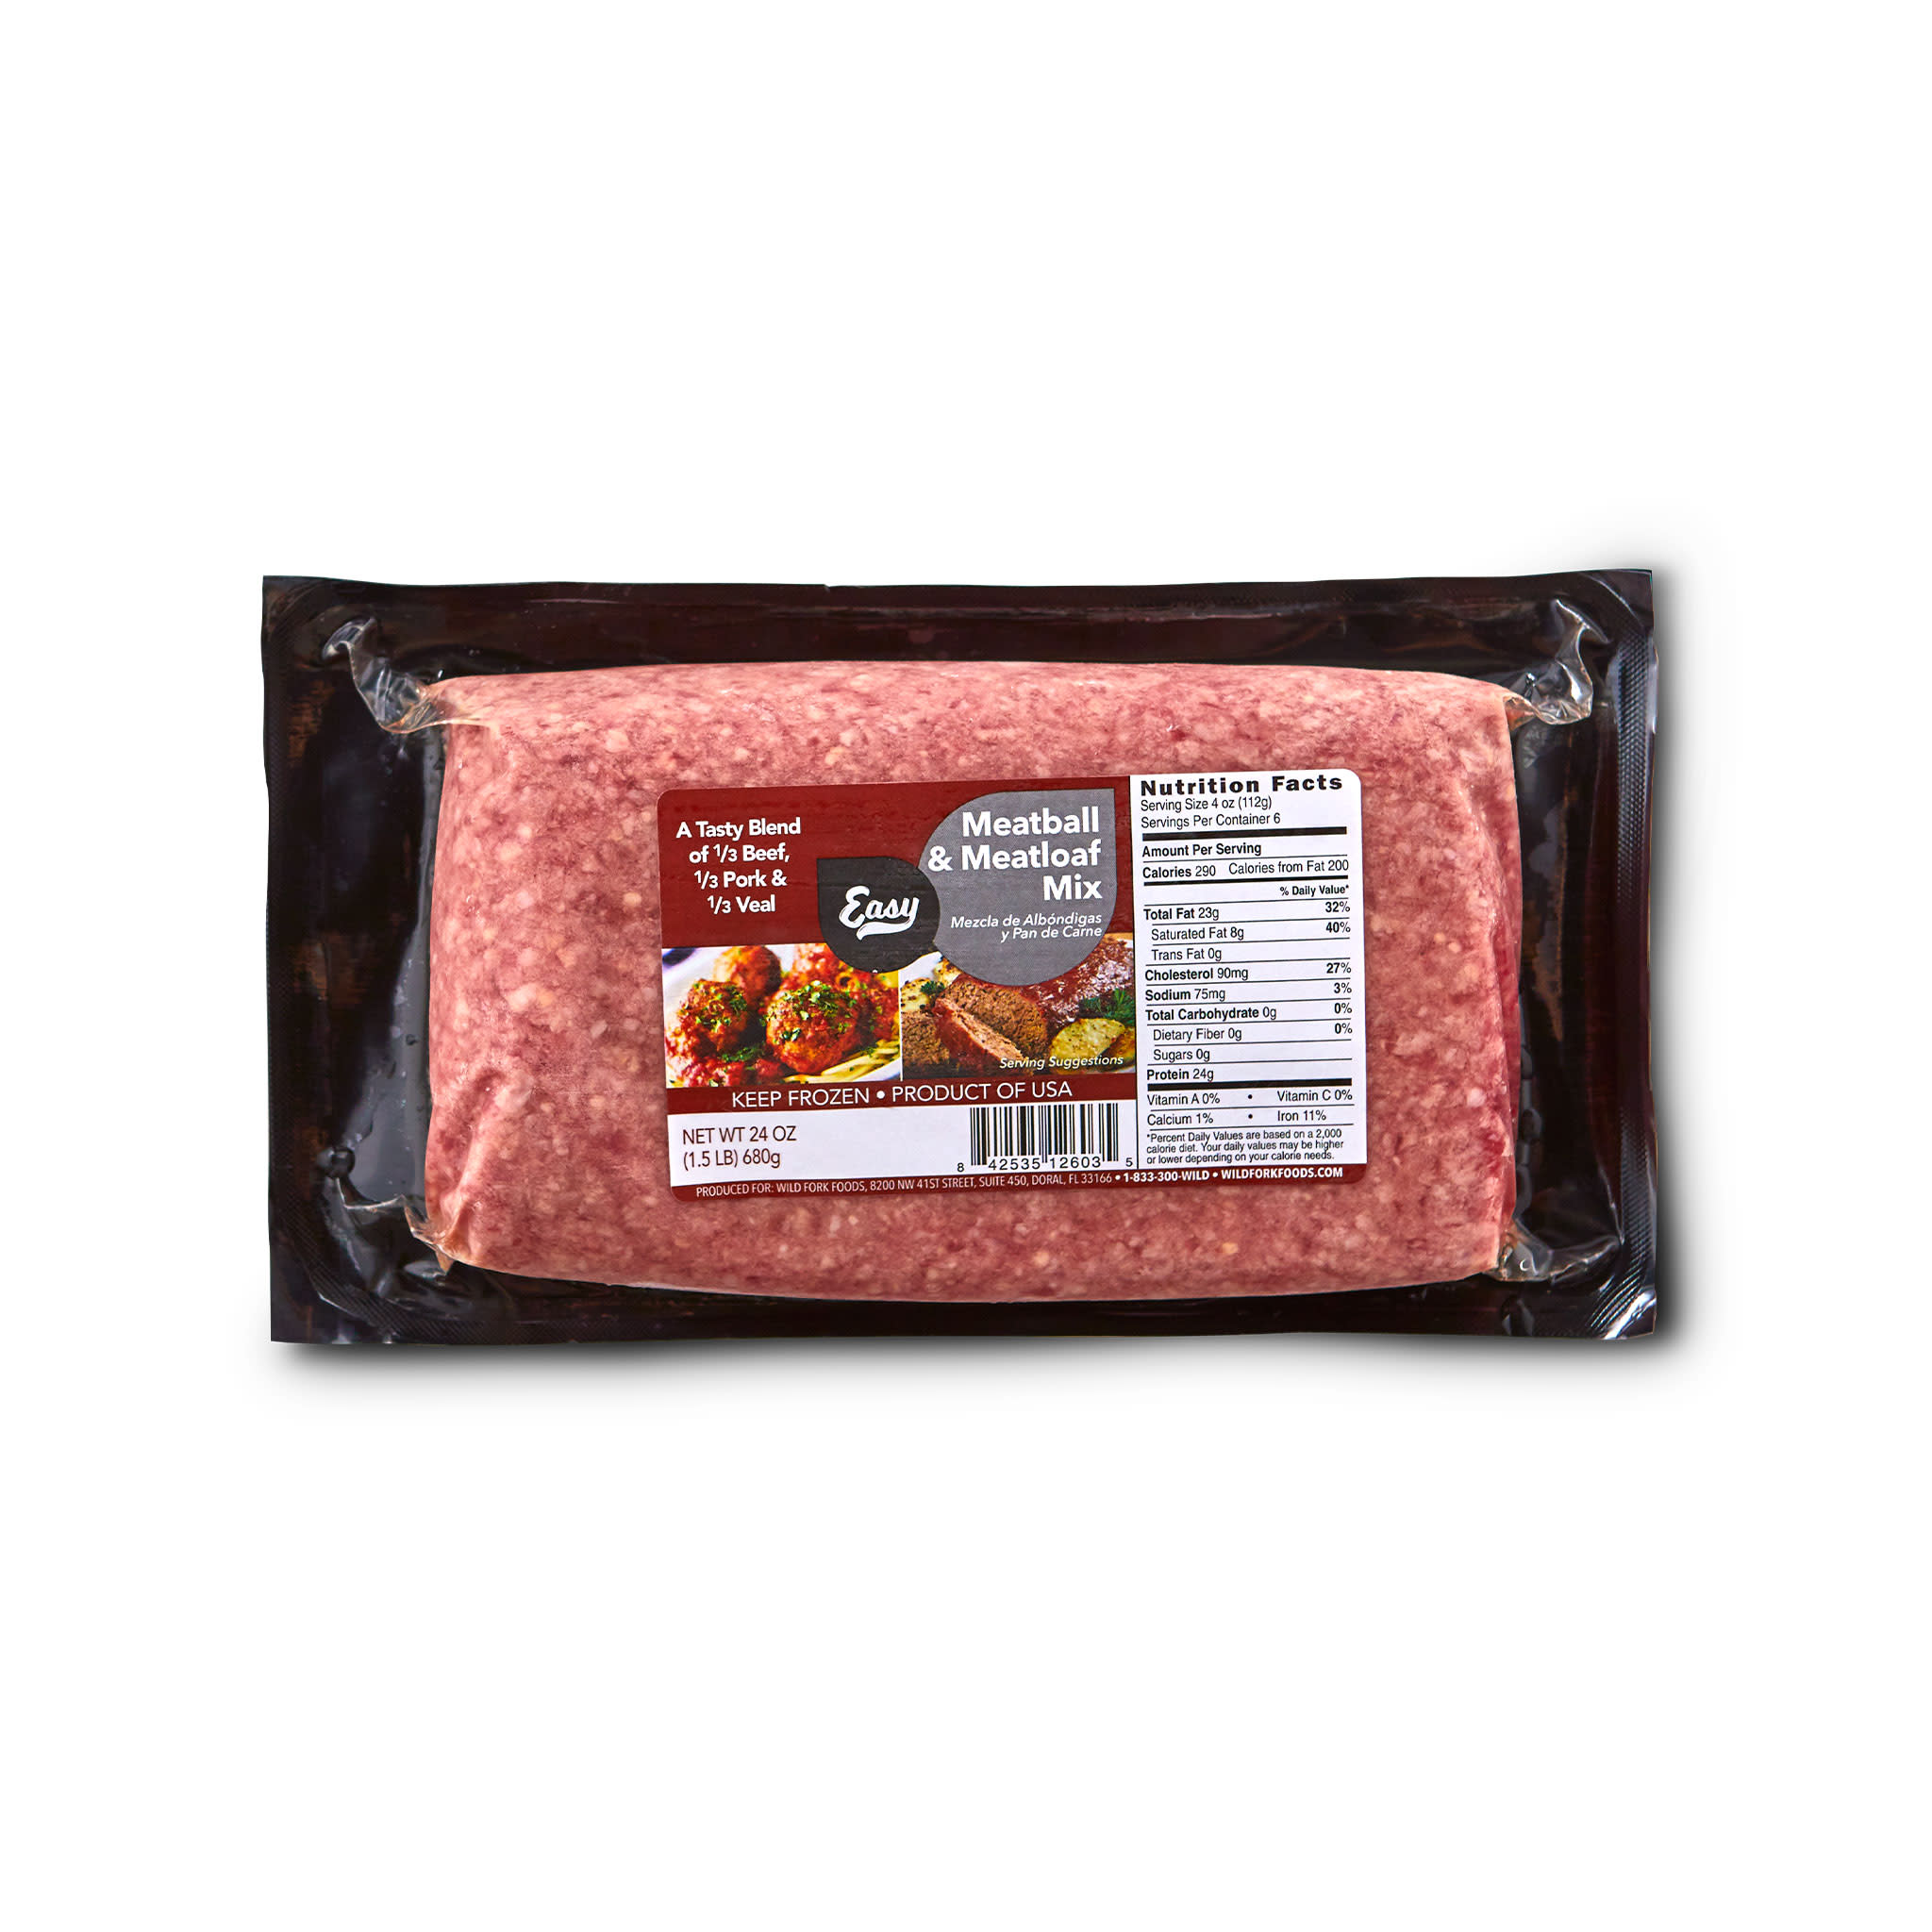 2603 WF PACKAGED Meatball & Meatloaf Mix of Ground Beef, Pork & Veal 80- Lean - 1.5 LB Beef